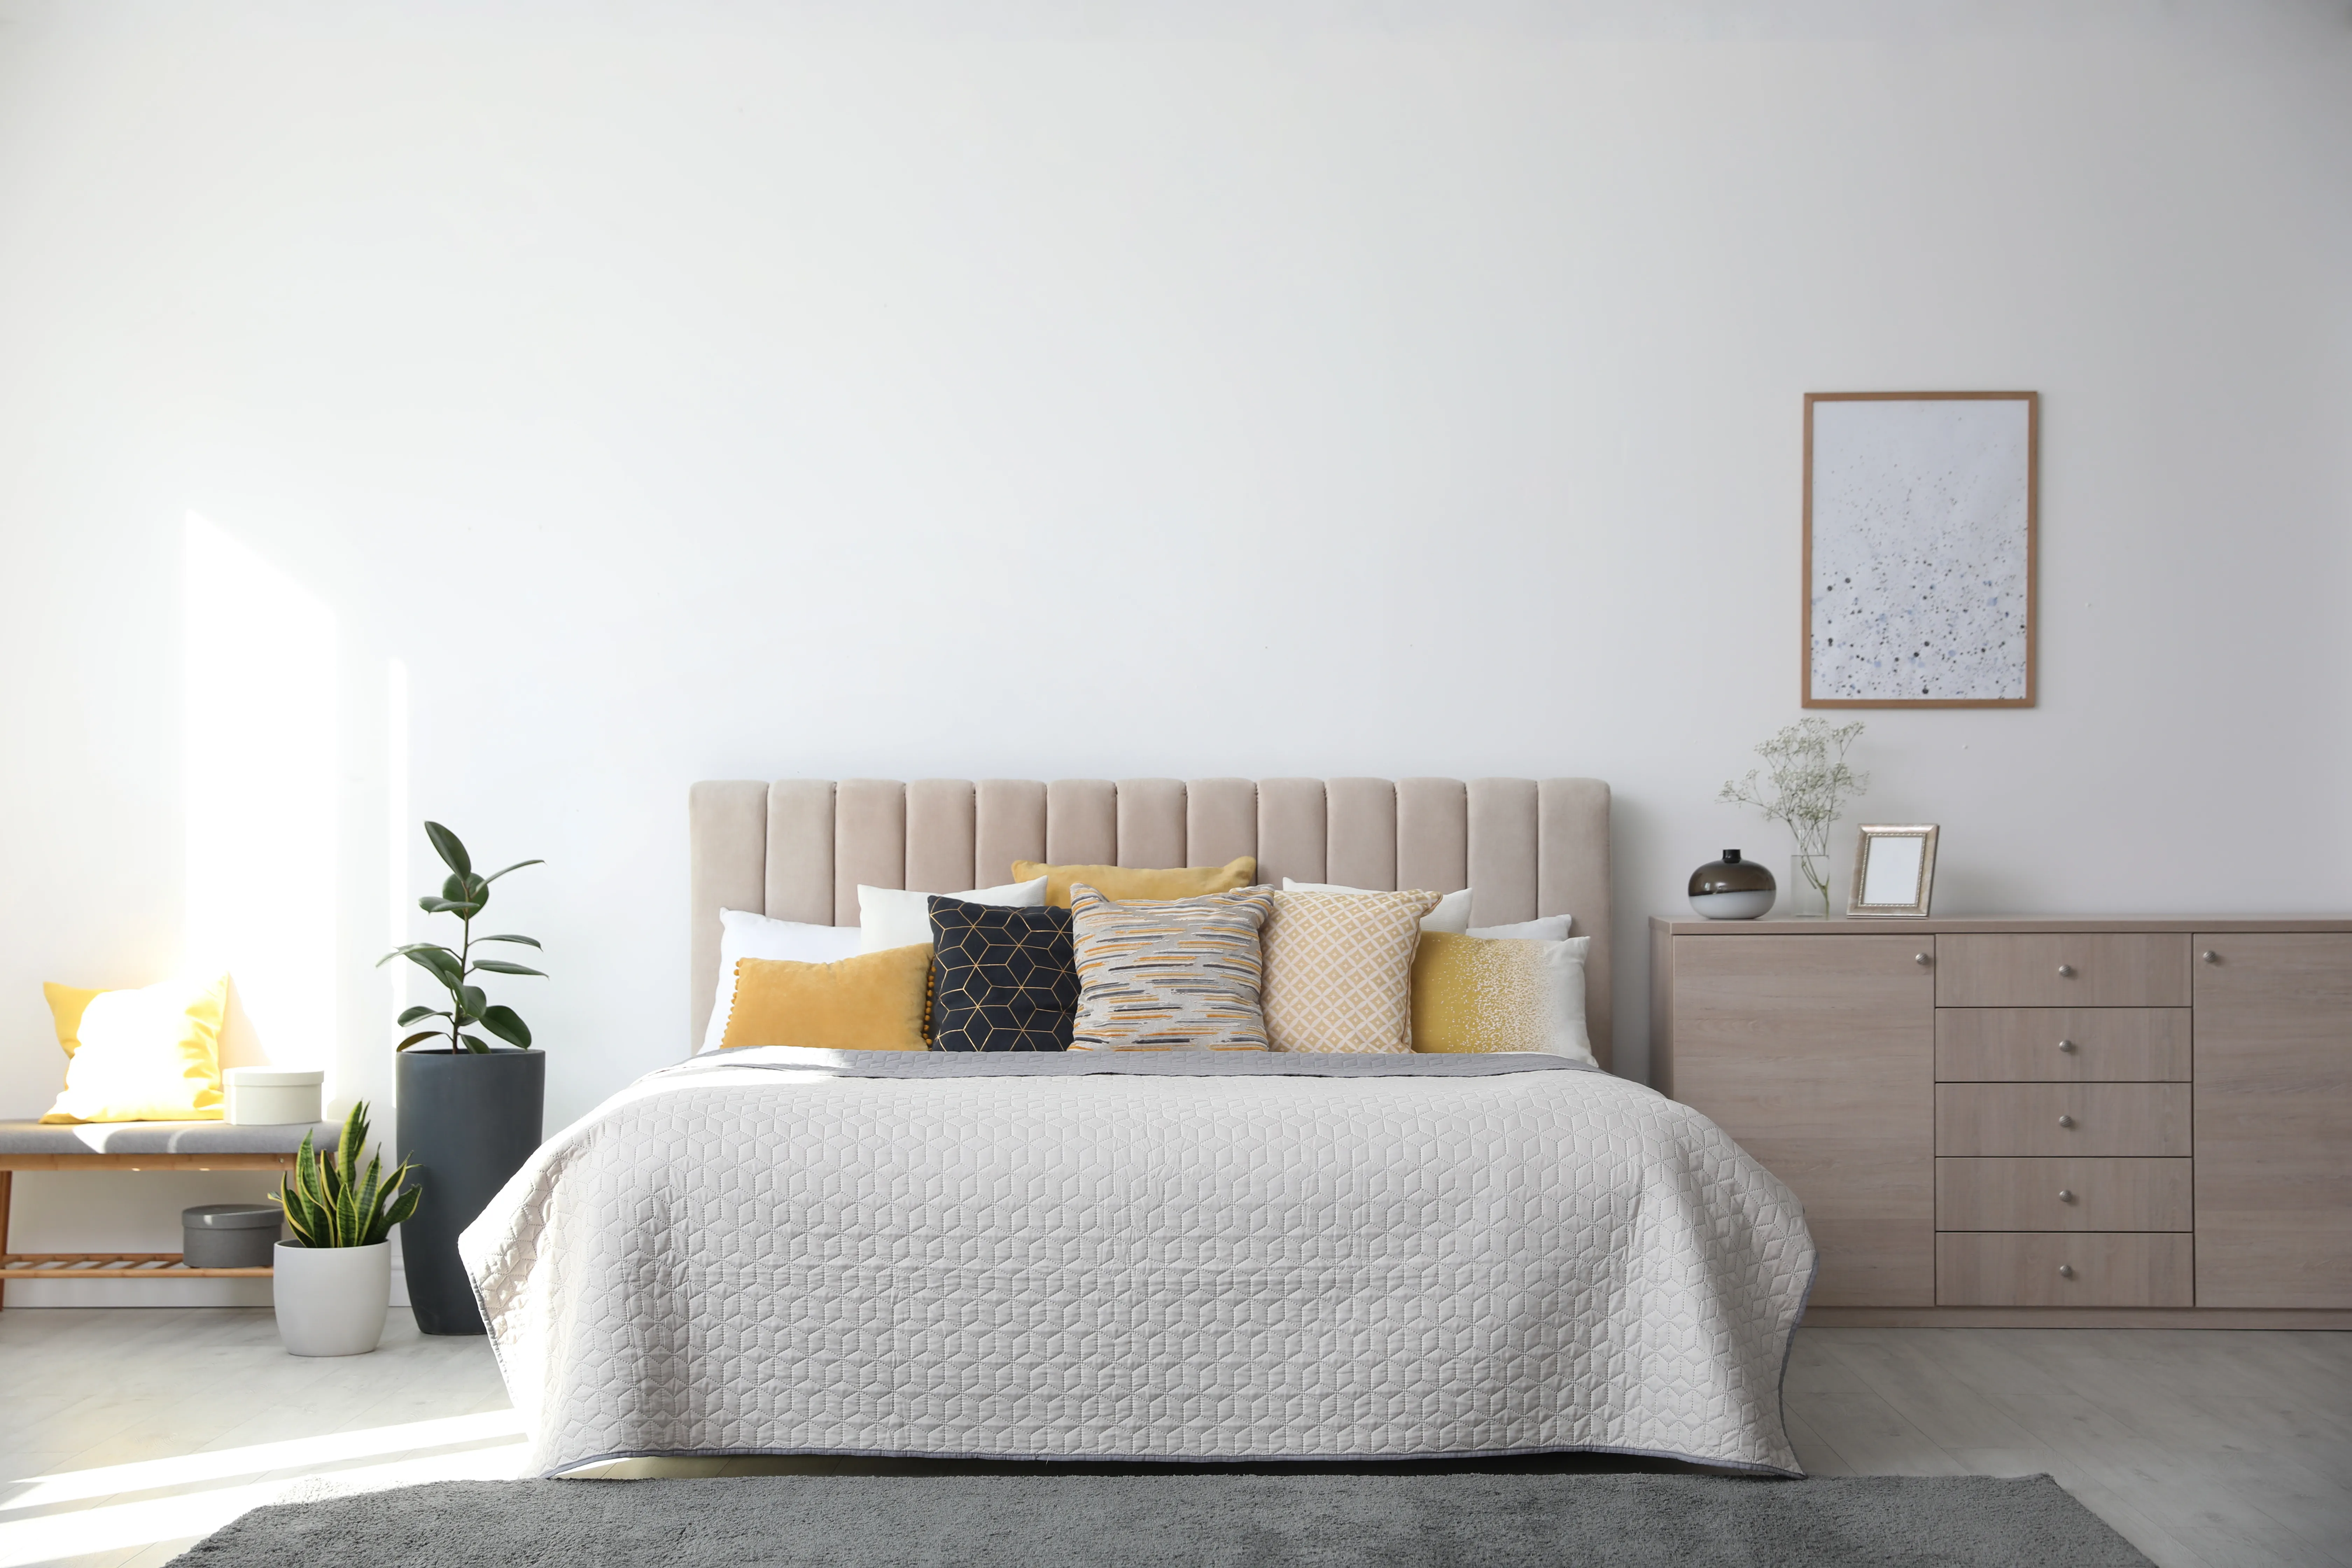 Where To Find Affordable Bedroom Furniture Online